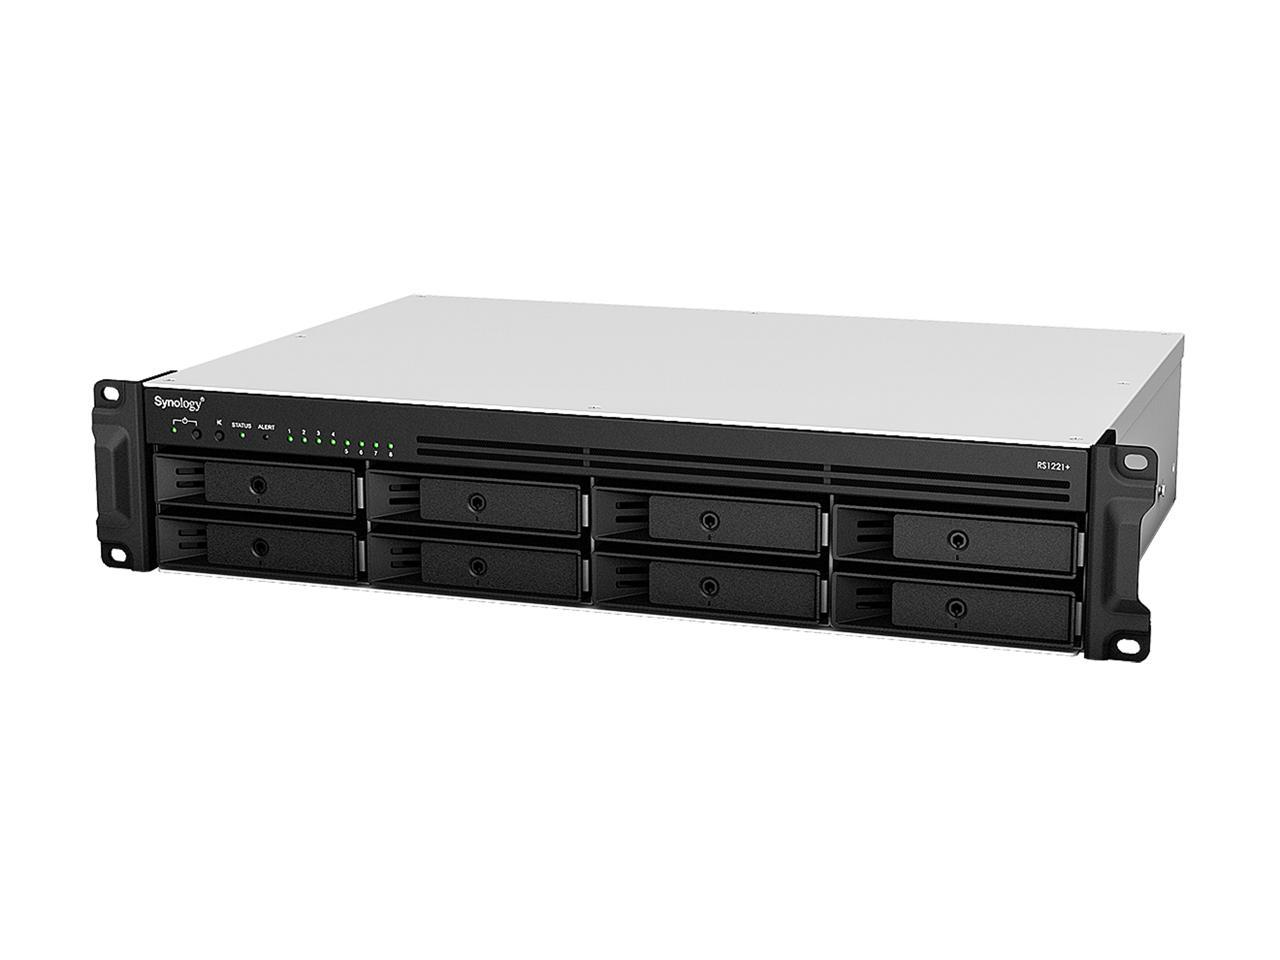 Synology RS1221+ RackStation with 16GB RAM 800GB (2x400GB) Cache, 1-Port 10GbE Adapter and 32TB (8 x 4TB) of Synology Plus NAS Drives Fully Assembled and Tested